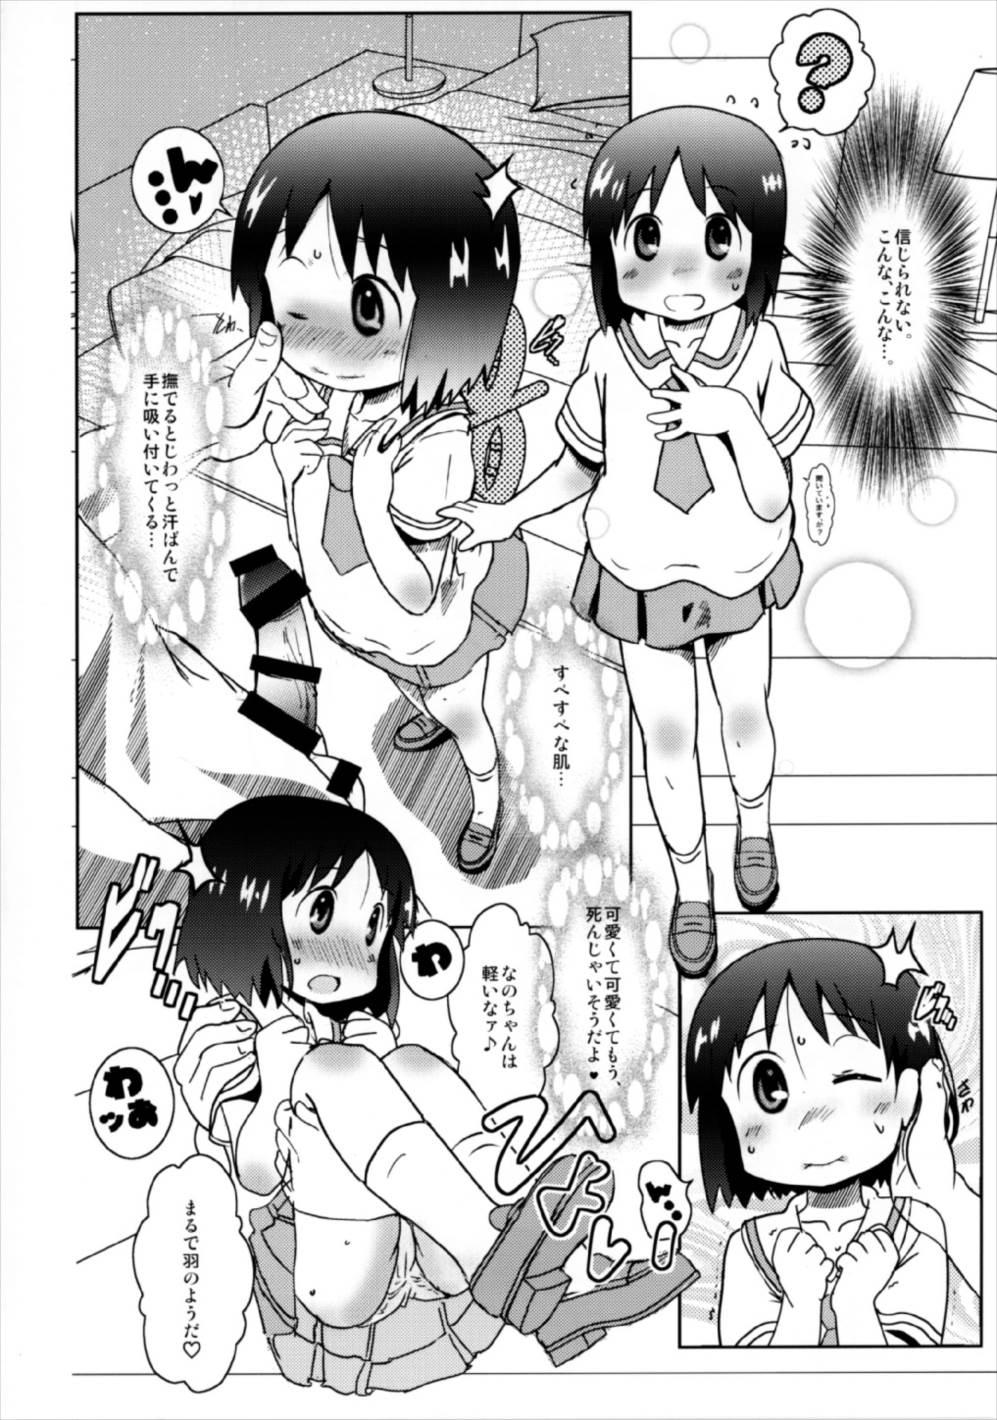 Money One Day Like This… - Nichijou Cheating Wife - Page 8